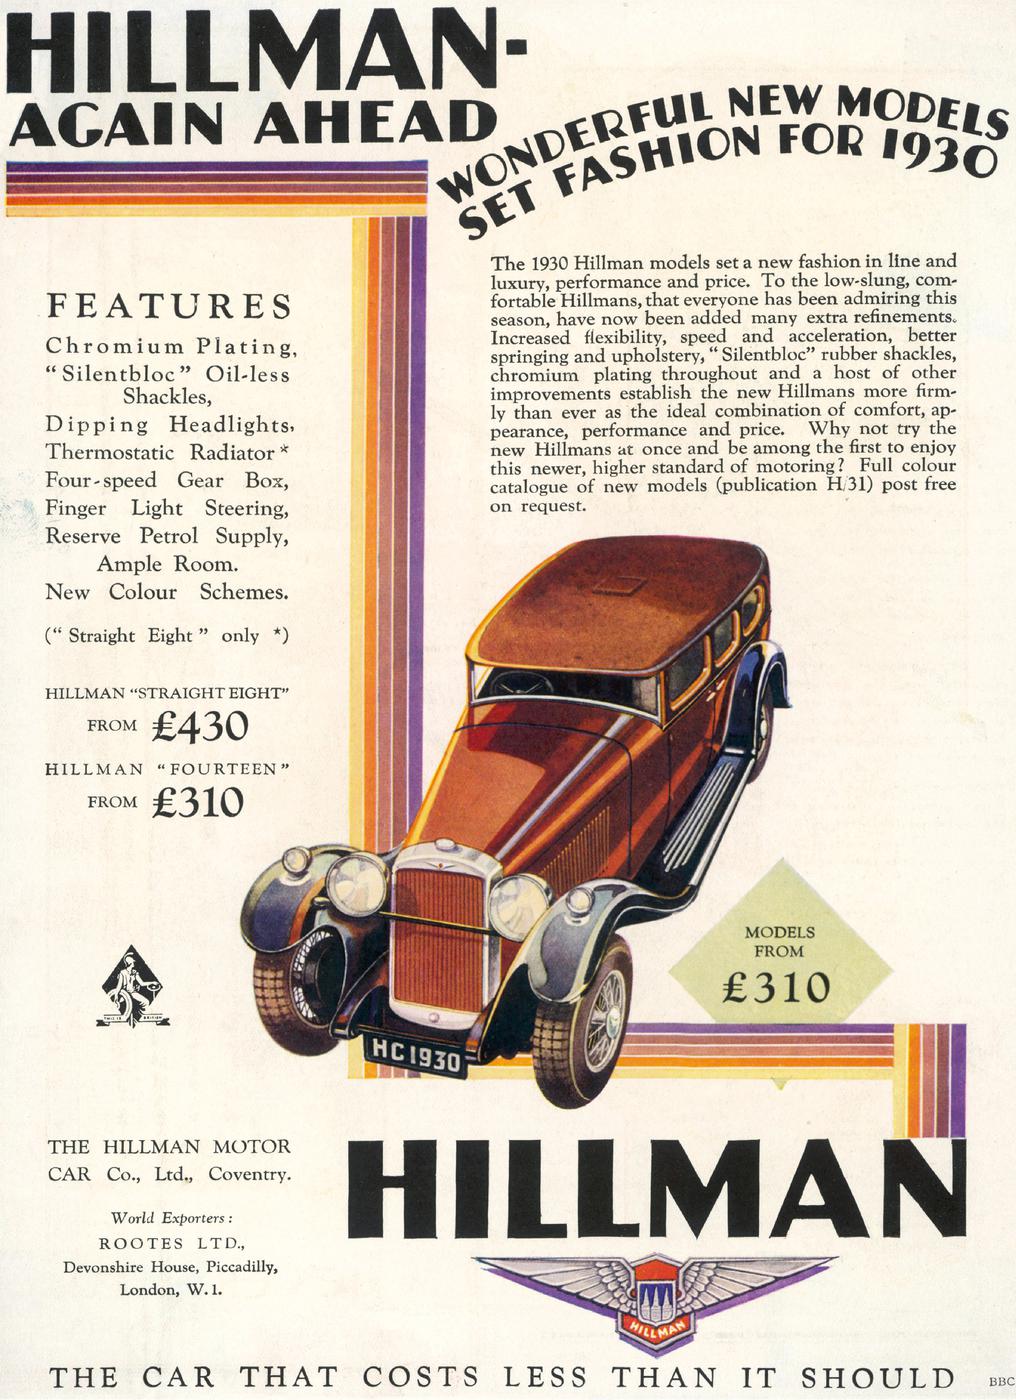 The new Hillmans for 1930 were the ideal combination of comfort appearance - photo 1